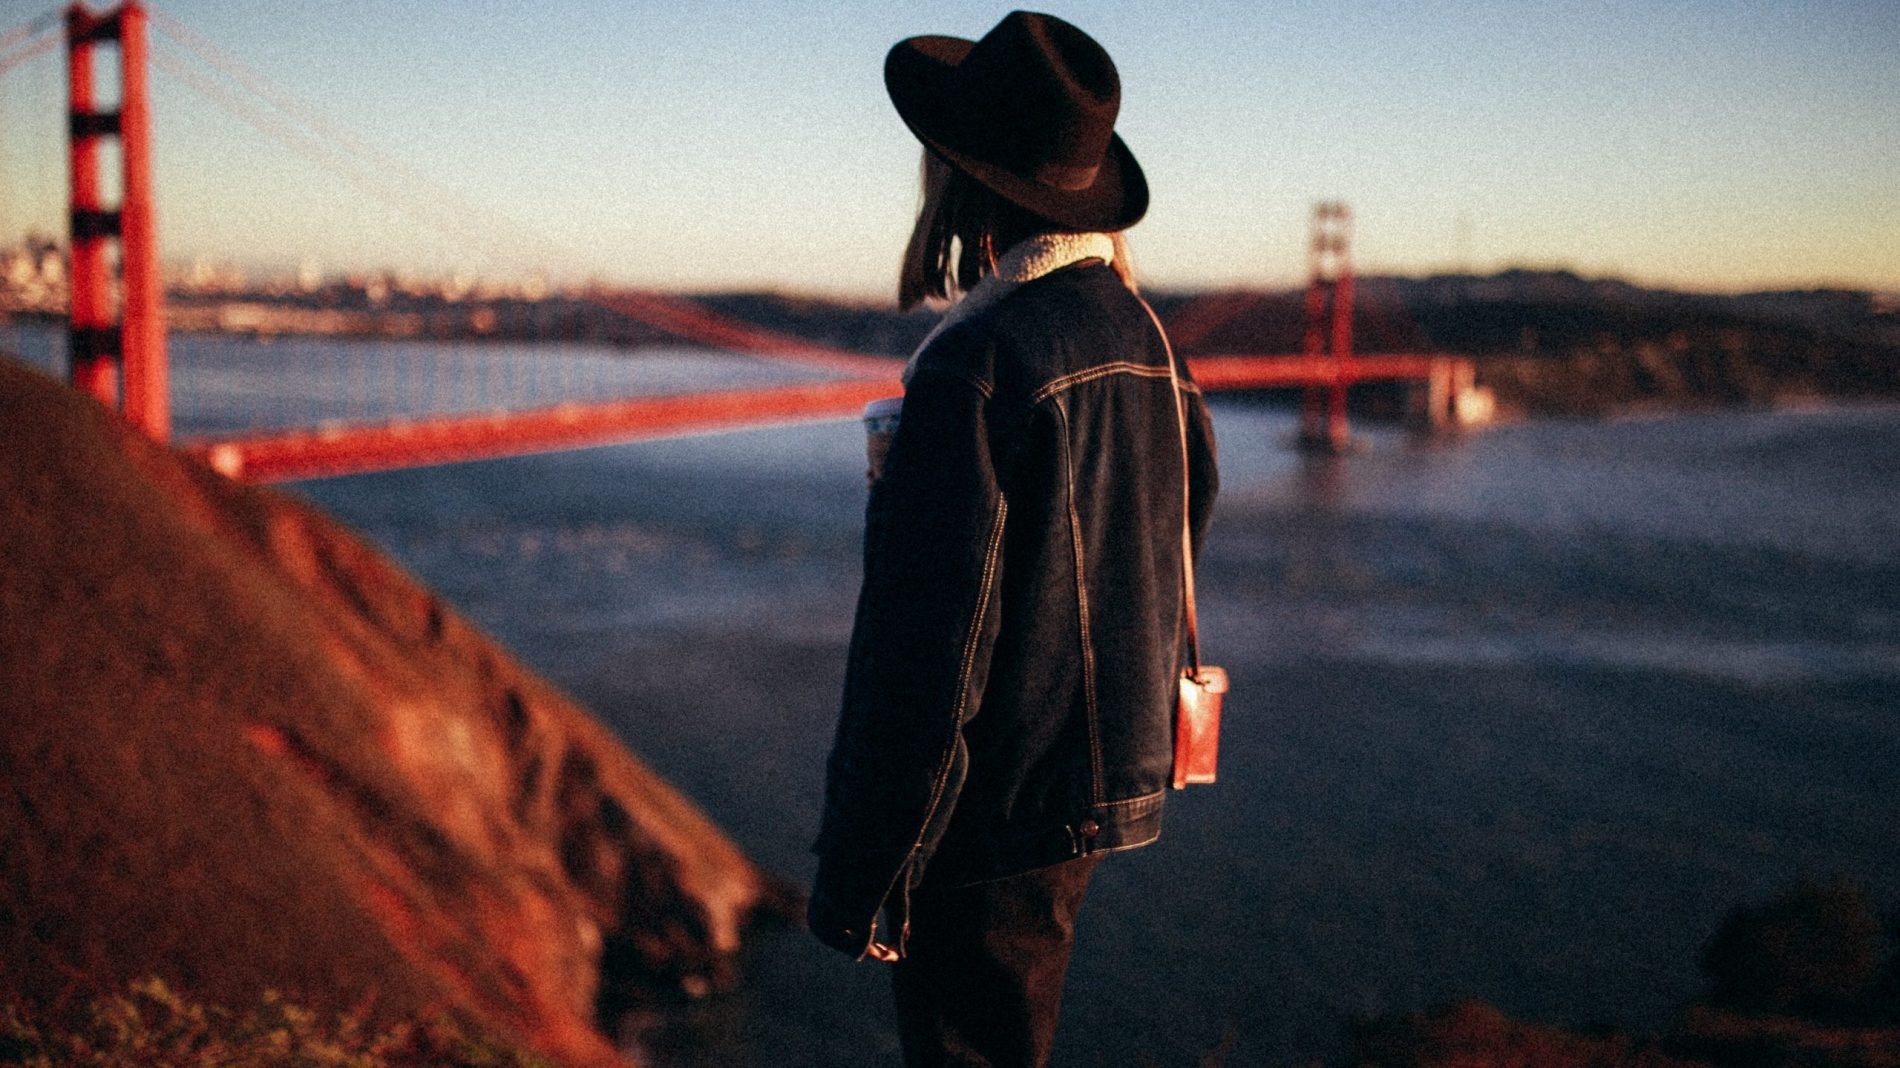 Photo of a person wearing a hat and staring at the Golden Gate Bridge in the distance